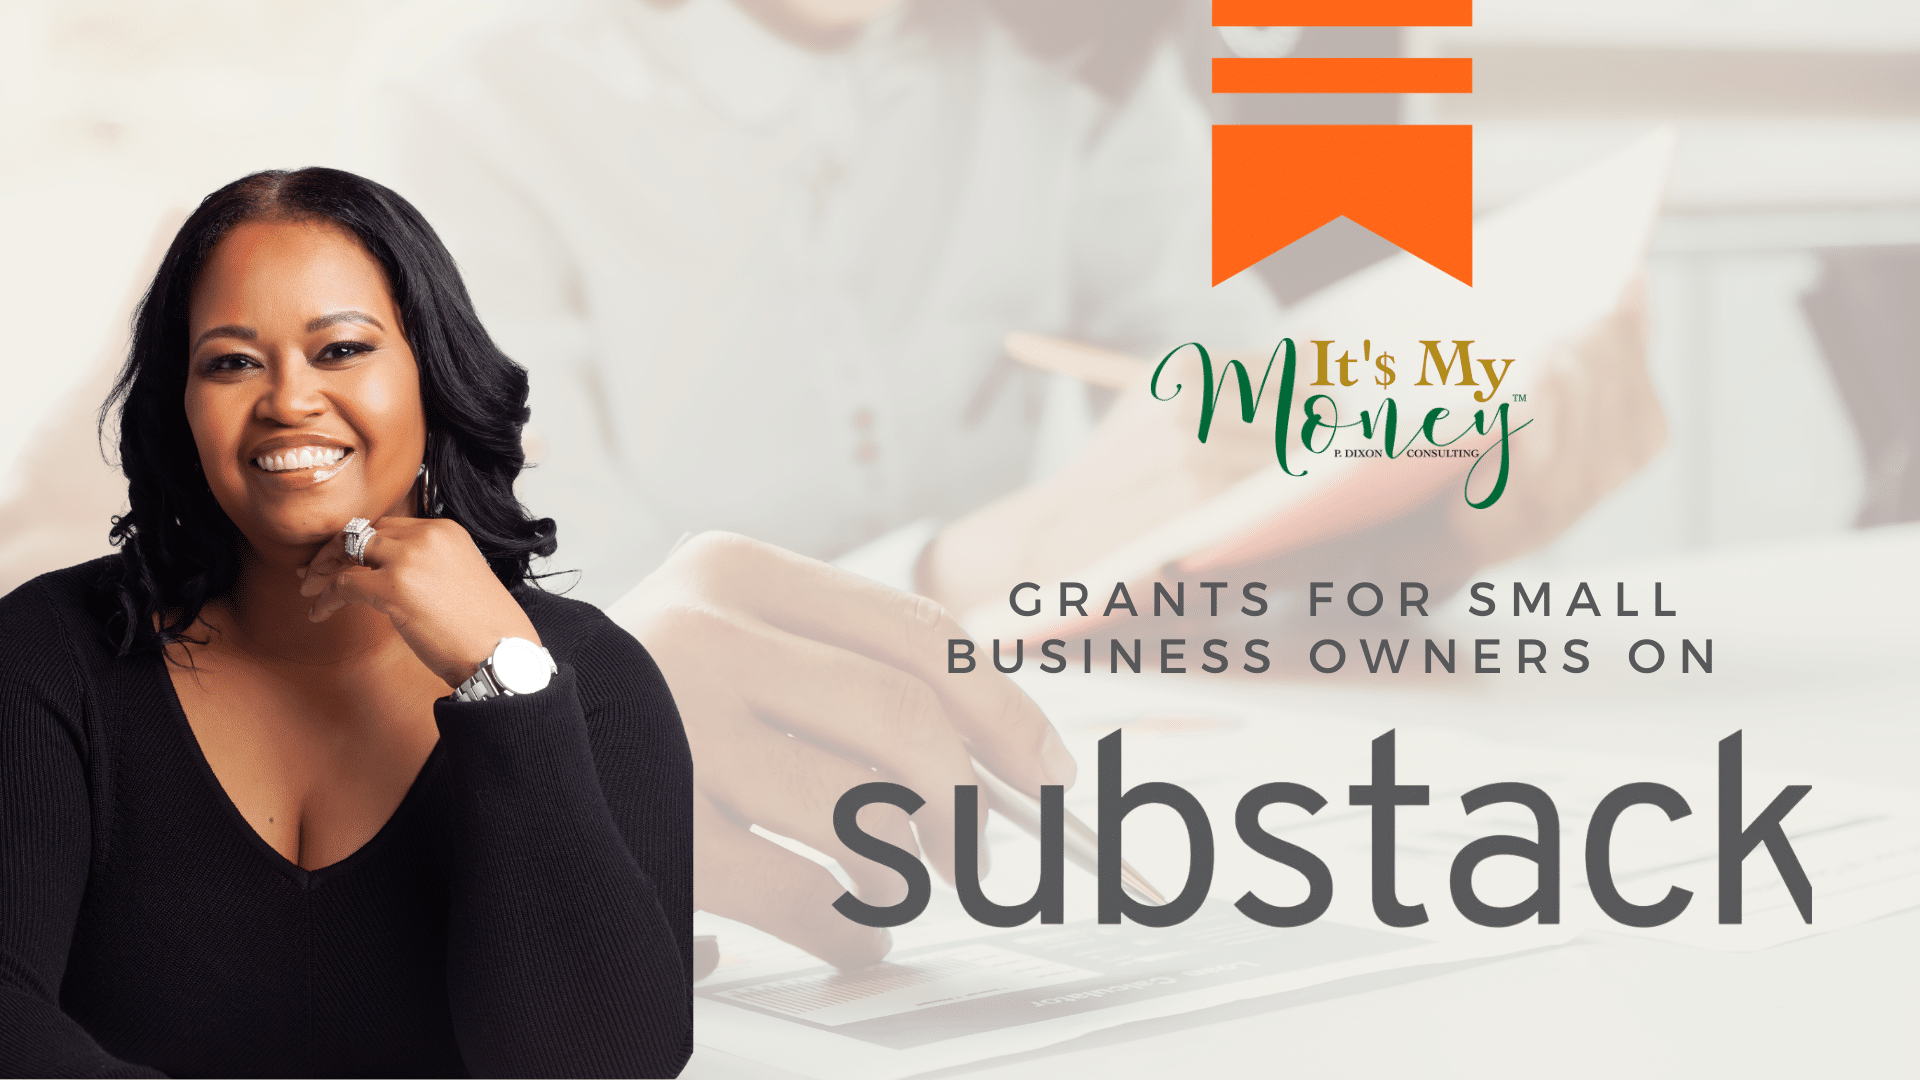 GRANTS FOR SMALL BUSINESS OWNERS